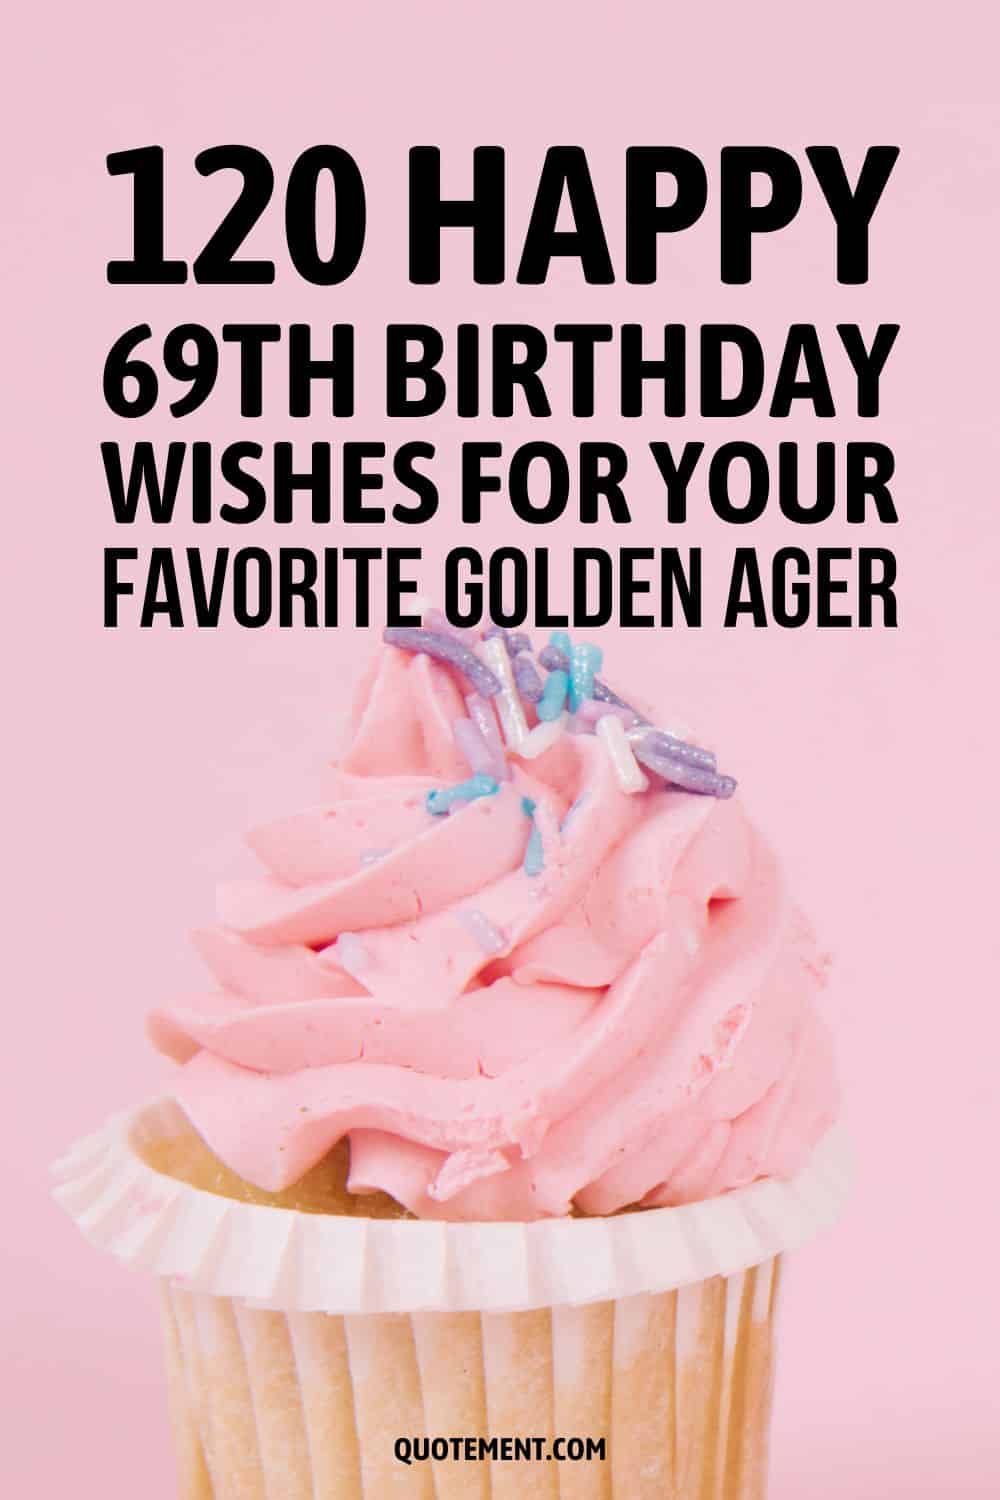 120 Happy 69th Birthday Wishes For Your Favorite Golden Ager 